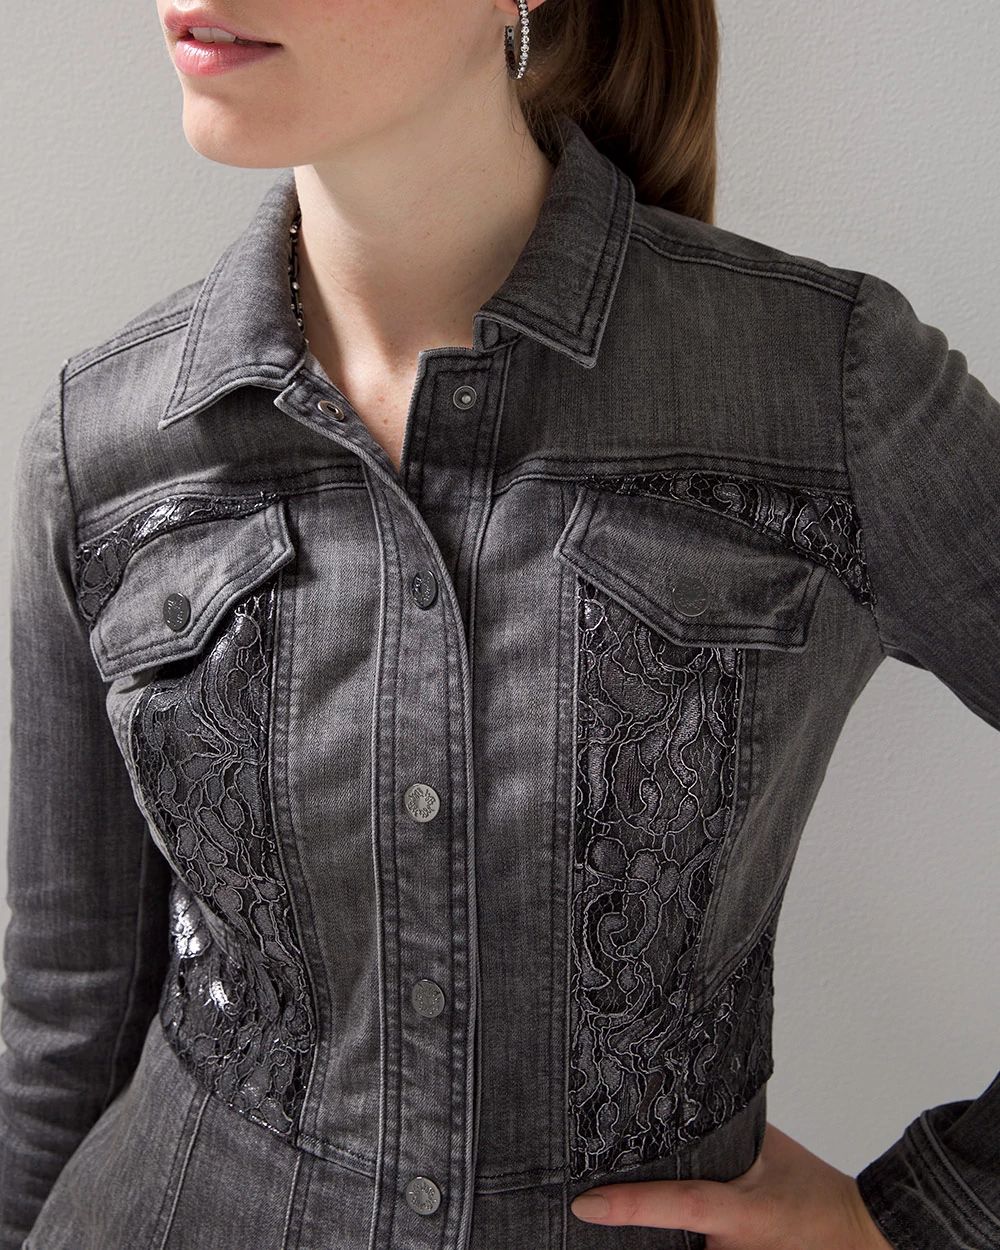 Lace Inset Denim Trucker Jacket click to view larger image.